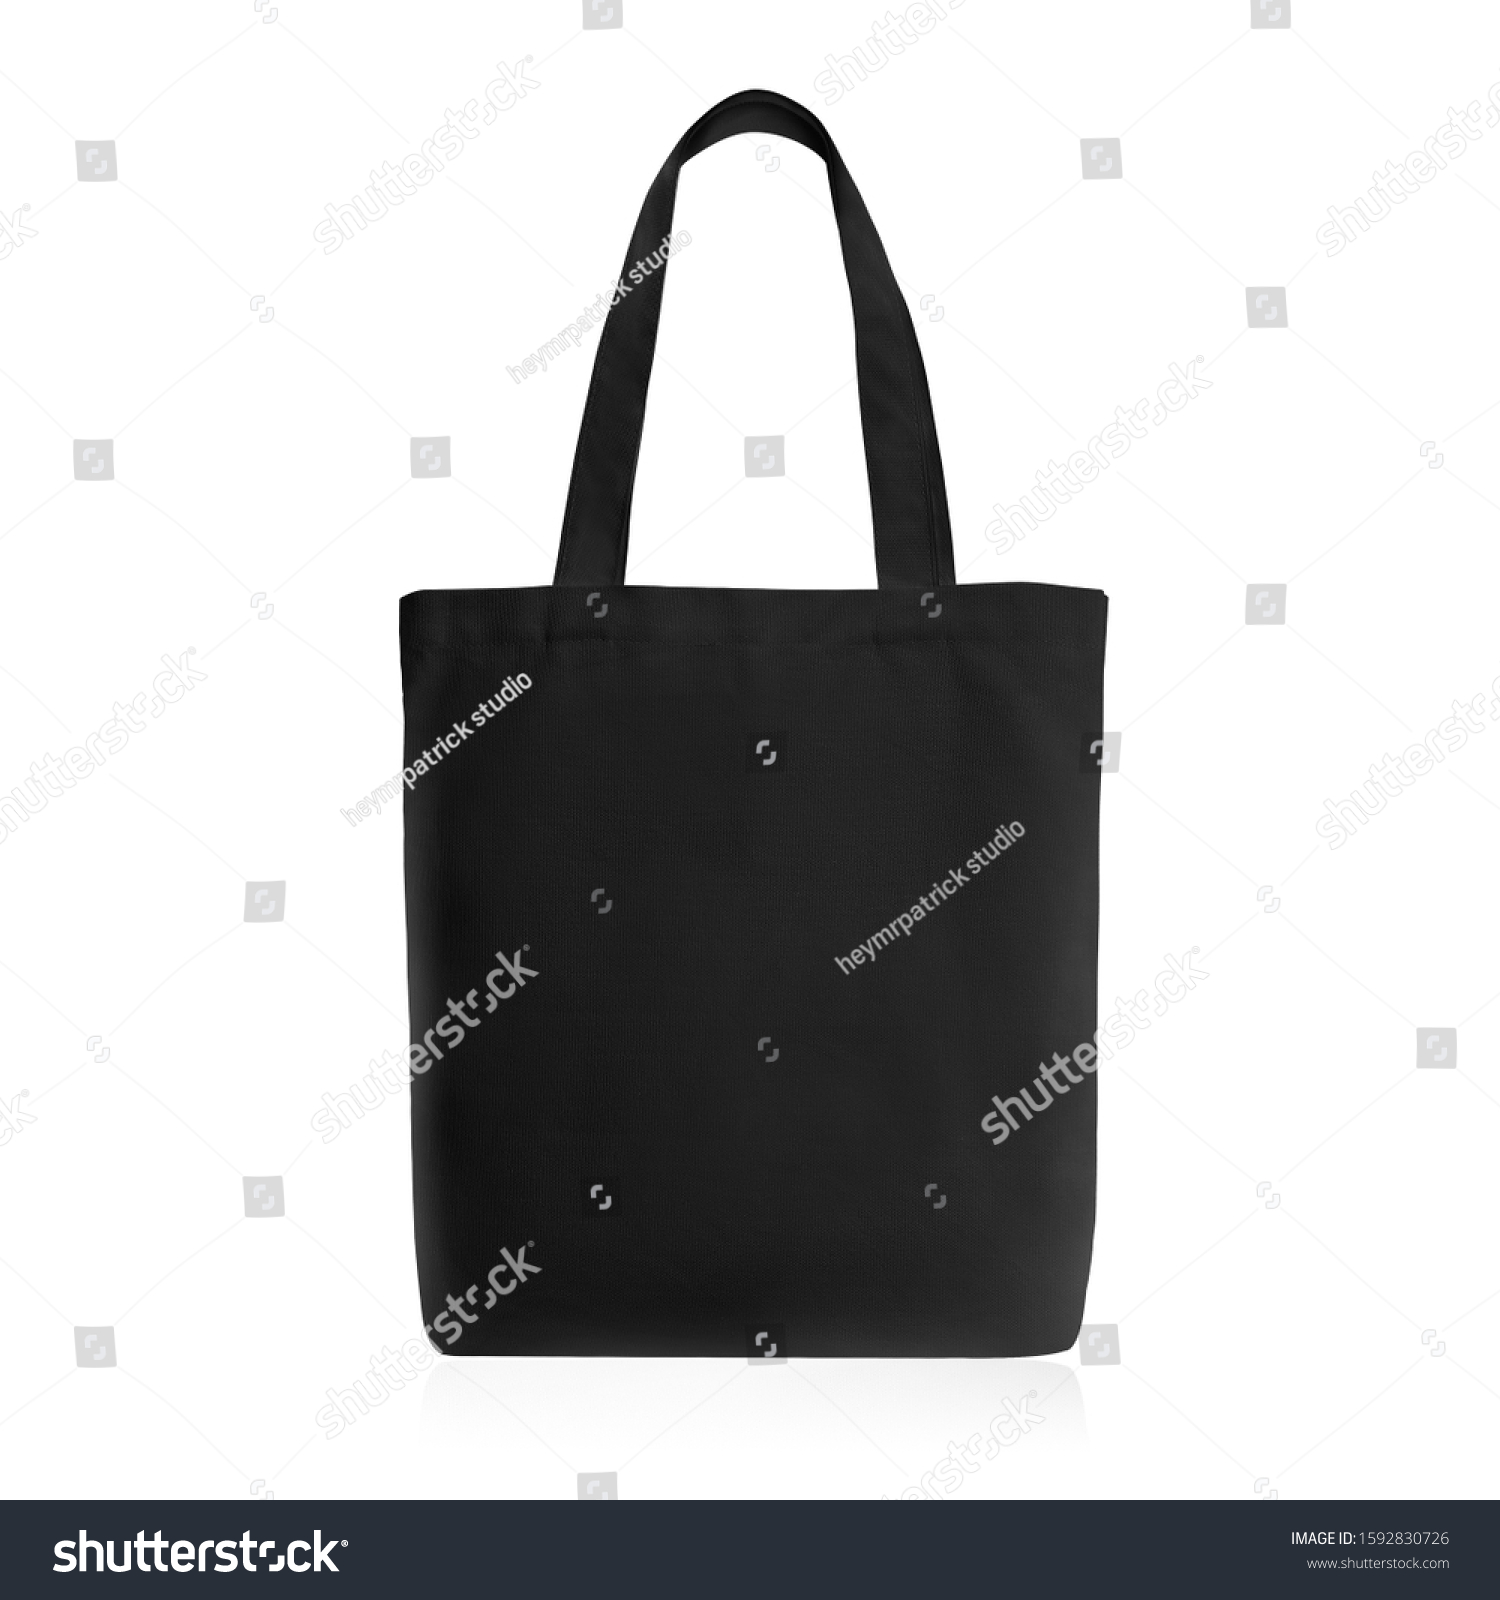 Classic Black Linen Fabric Fashion Cotton & Eco Friendly Tote Bag Isolated on White Background. Reusable Blank Canvas Bag for Groceries and Shopping. Design Template for Mock up. No People #1592830726